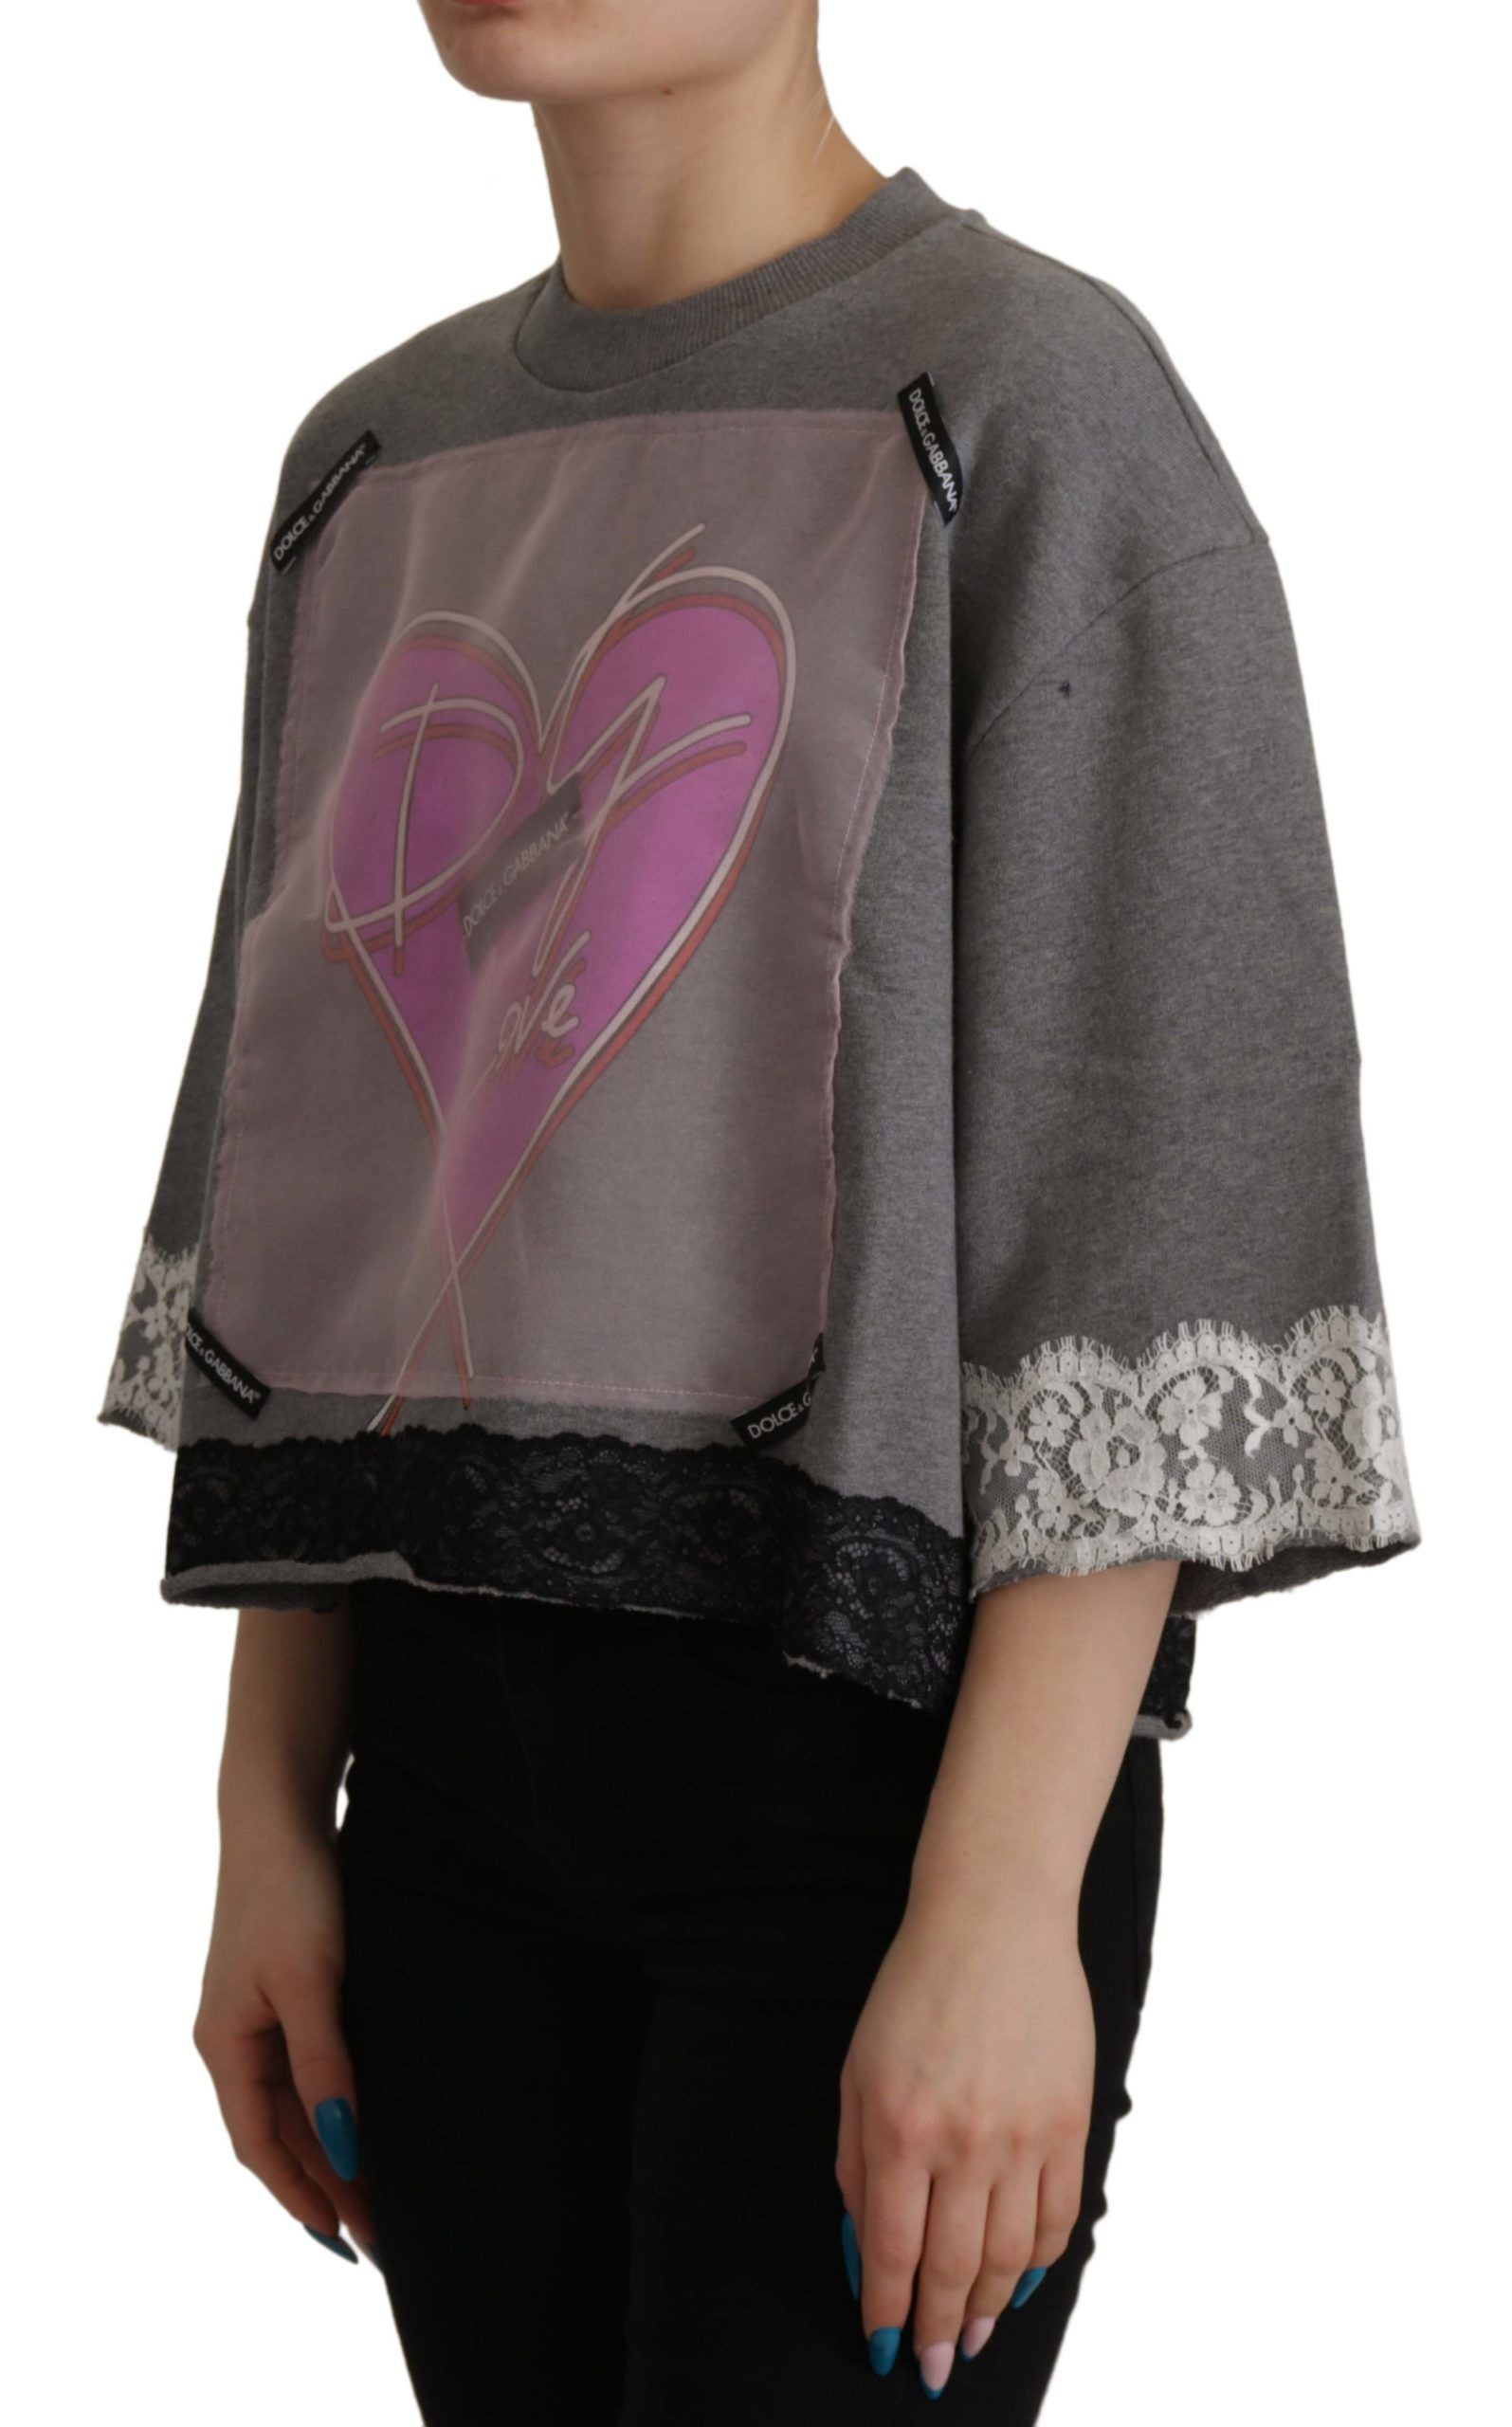 Dolce & Gabbana Chic Grey Cotton Heart Tee with Bell Sleeves